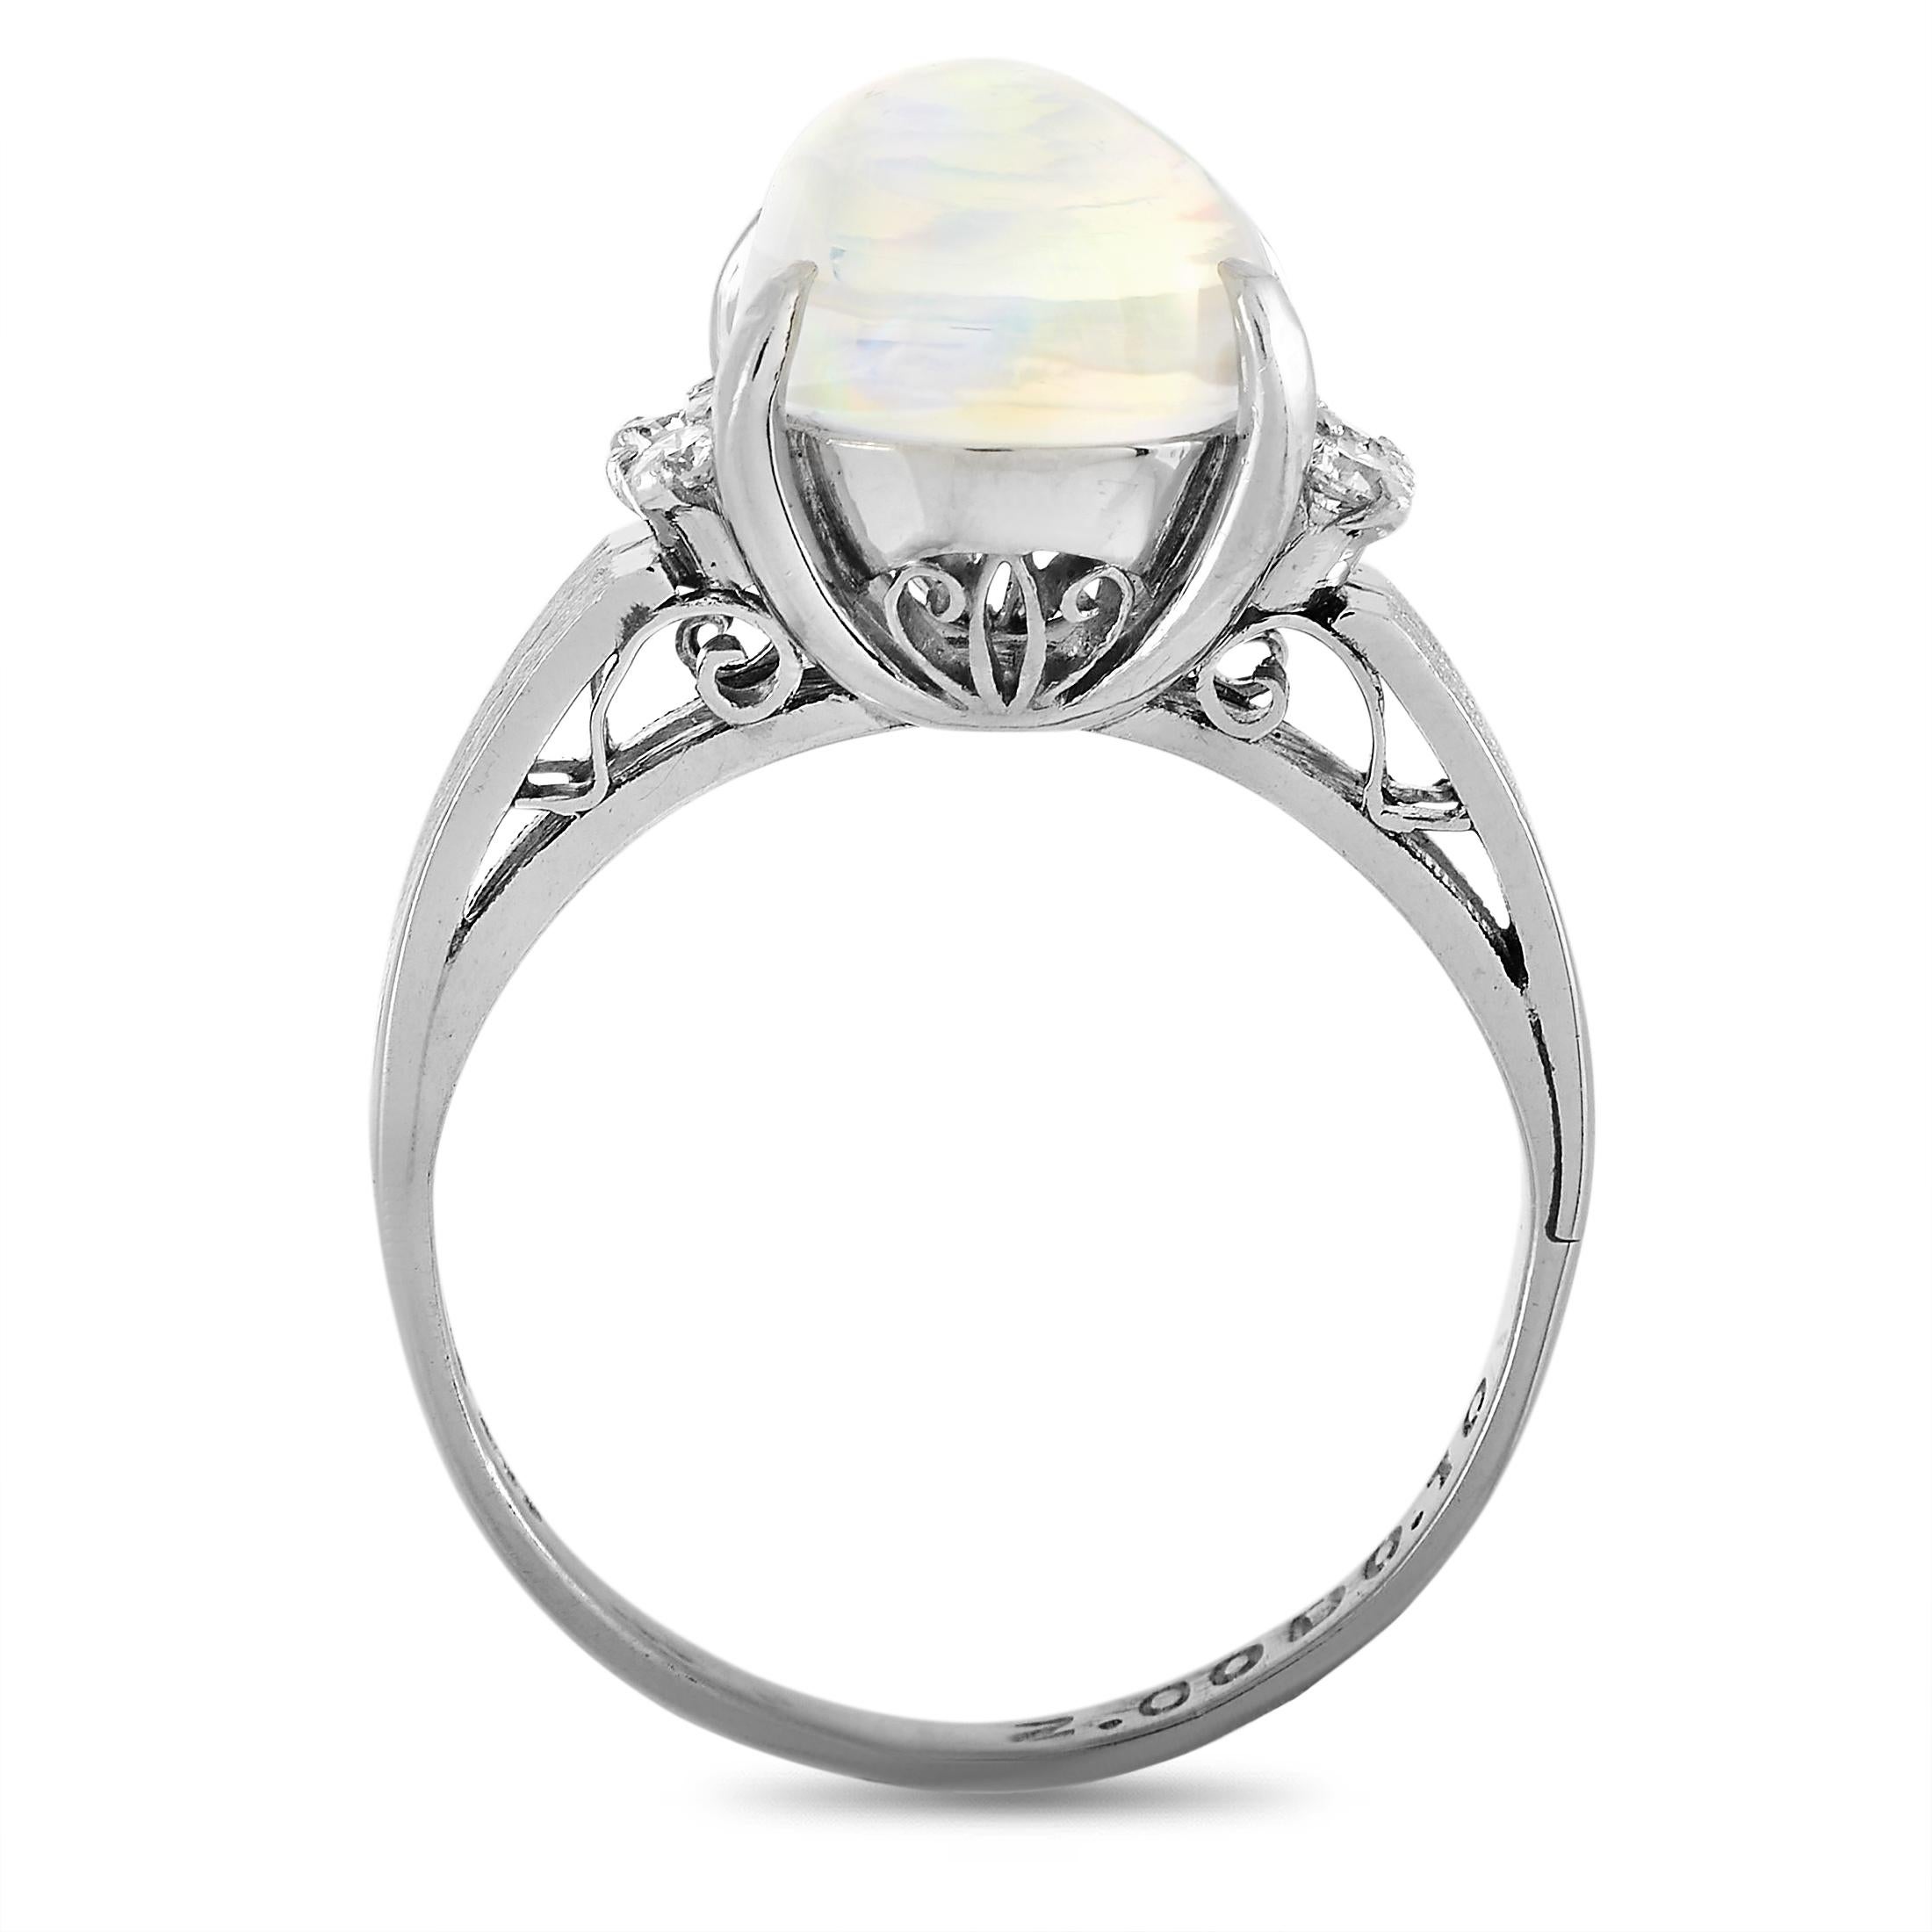 This LB Exclusive ring is crafted from platinum and weighs 4.1 grams, boasting band thickness of 2 mm and top height of 10 mm, while top dimensions measure 10 by 12 mm. The ring is set with a 2.00 ct opal and a total of 0.10 carats of diamonds.
 
